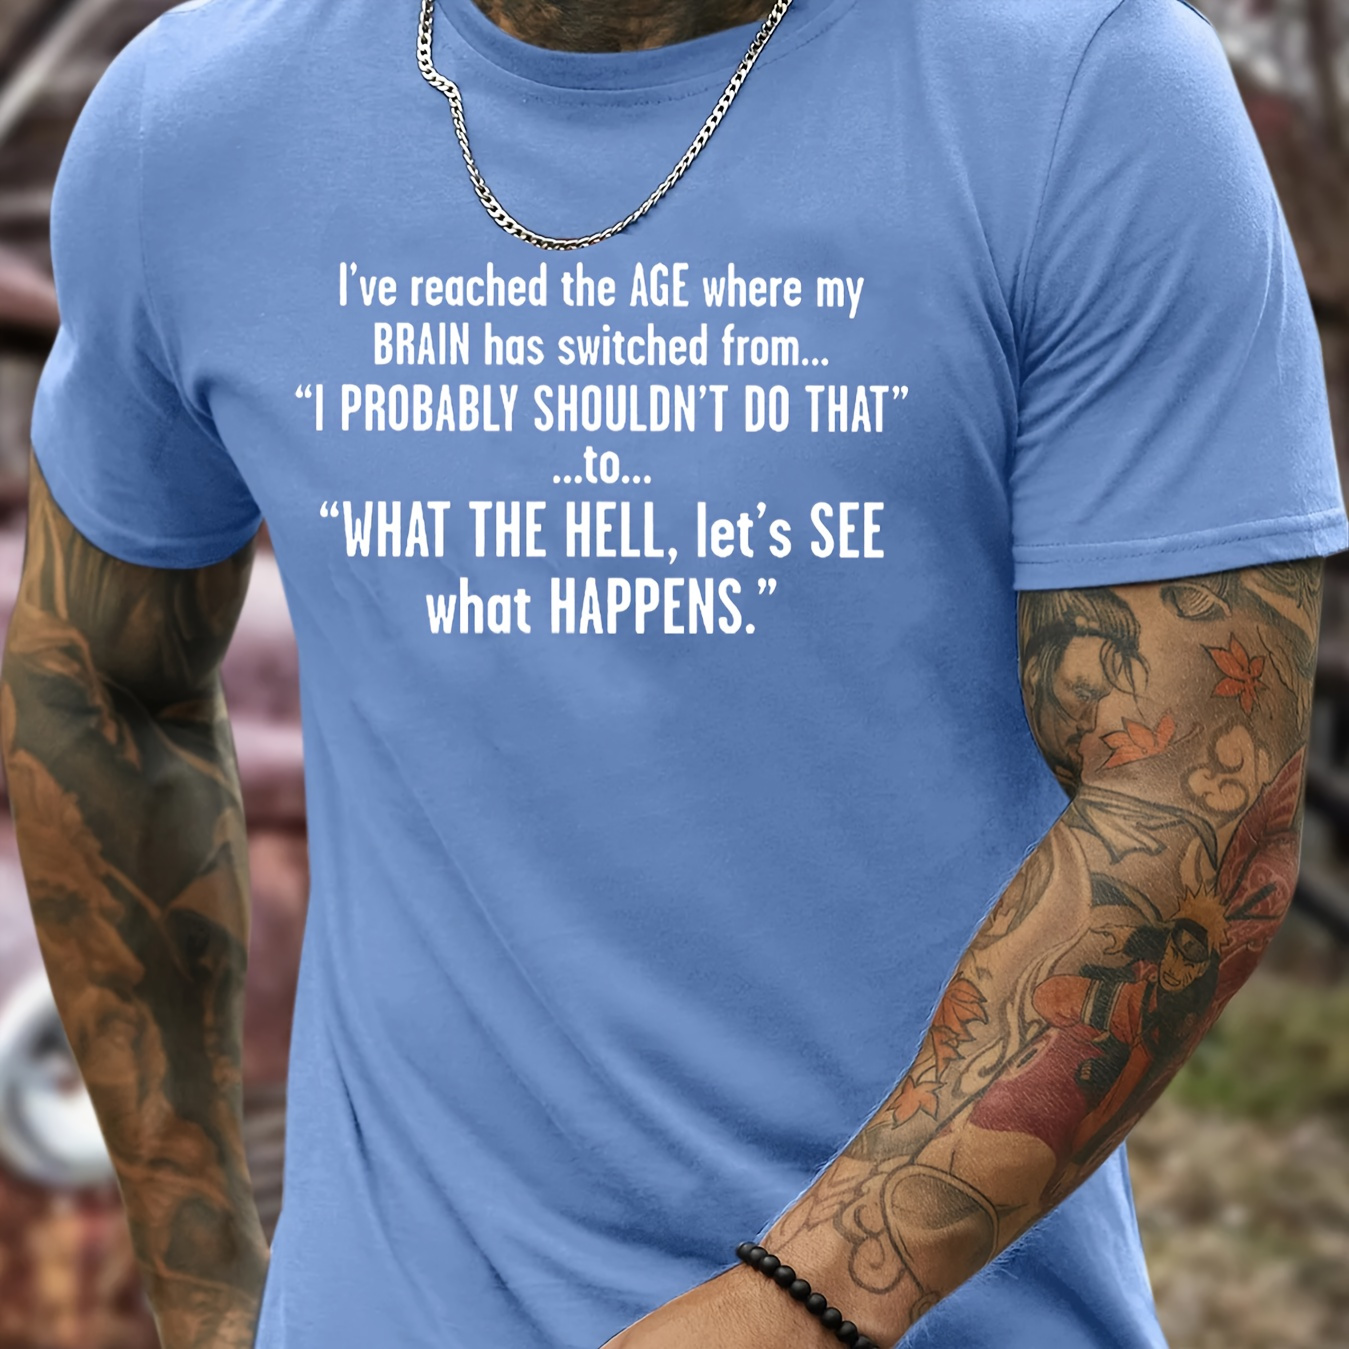 

I've Reached The Age... Print Tee Shirt, Tees For Men, Casual Short Sleeve T-shirt For Summer